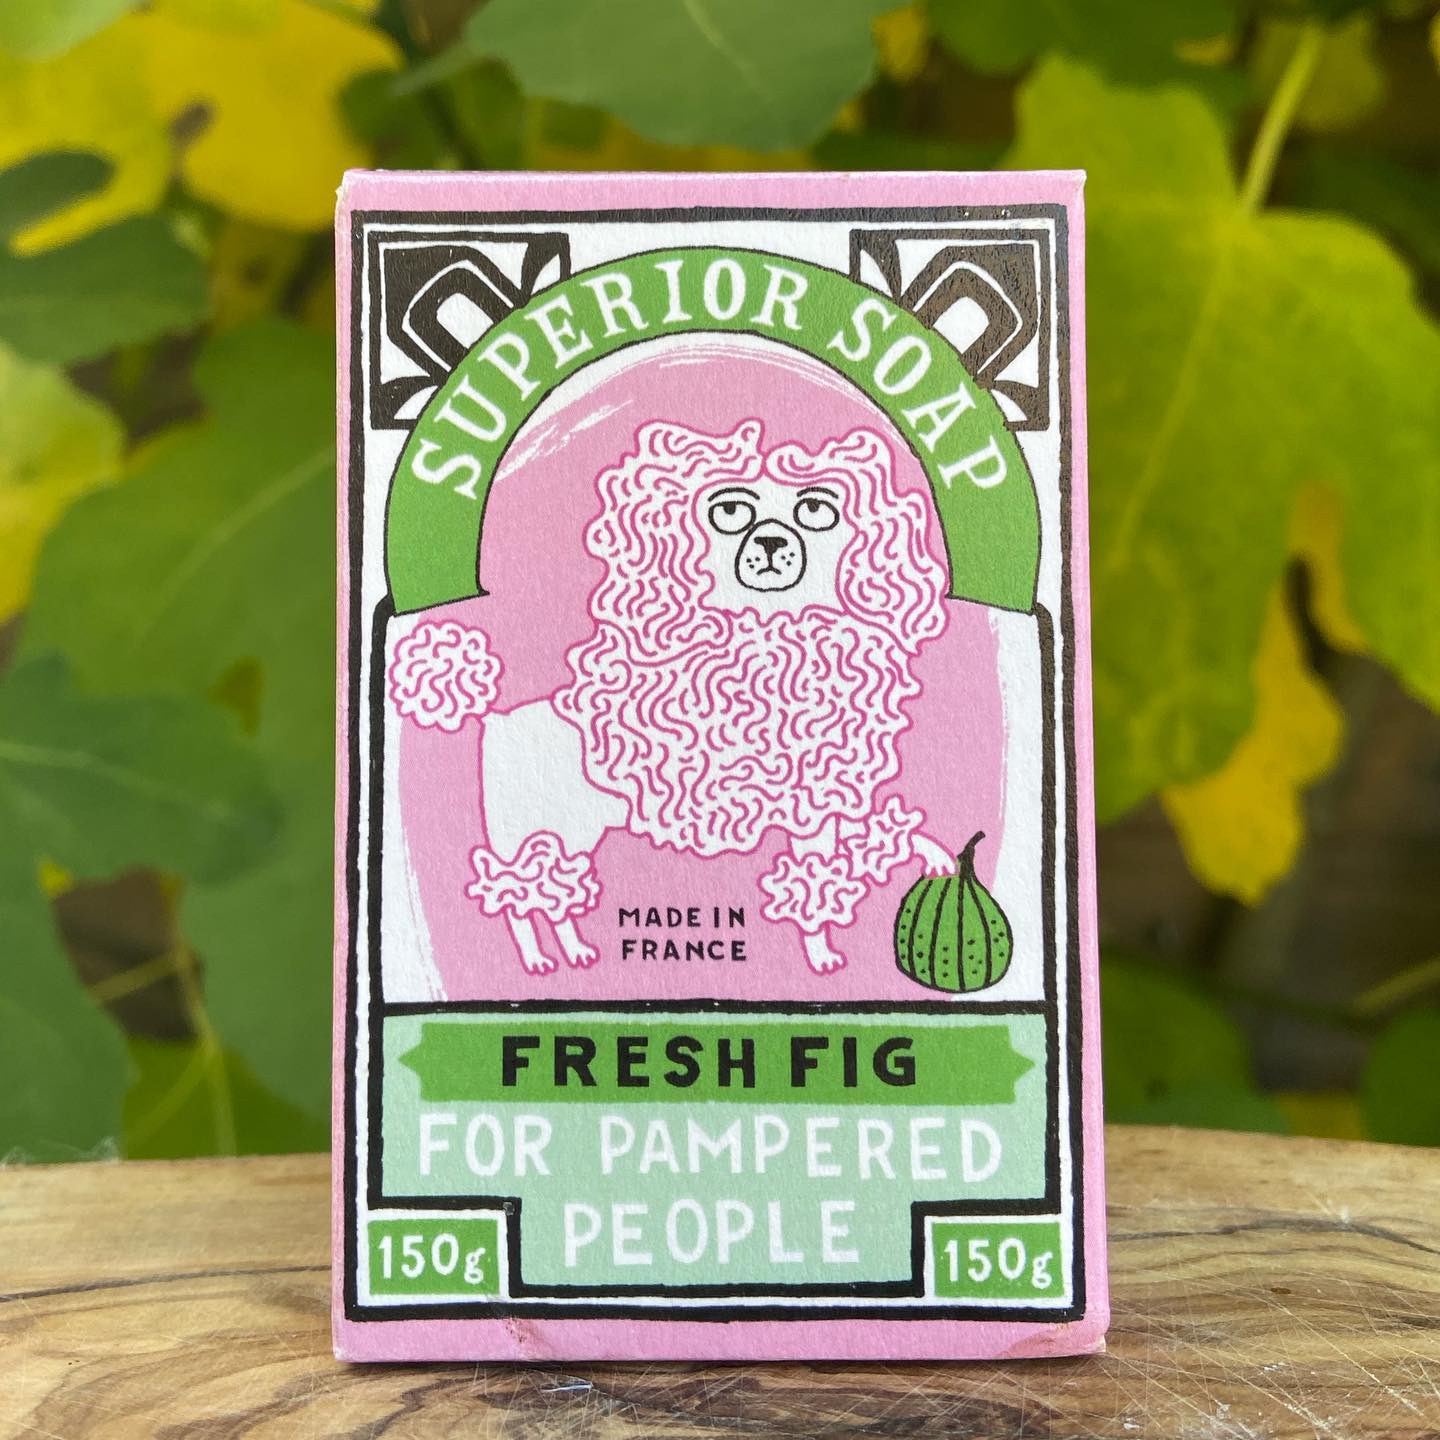 For pampered people 🐩 all of our soaps are made according to the Savon de Marseille technique, fa...